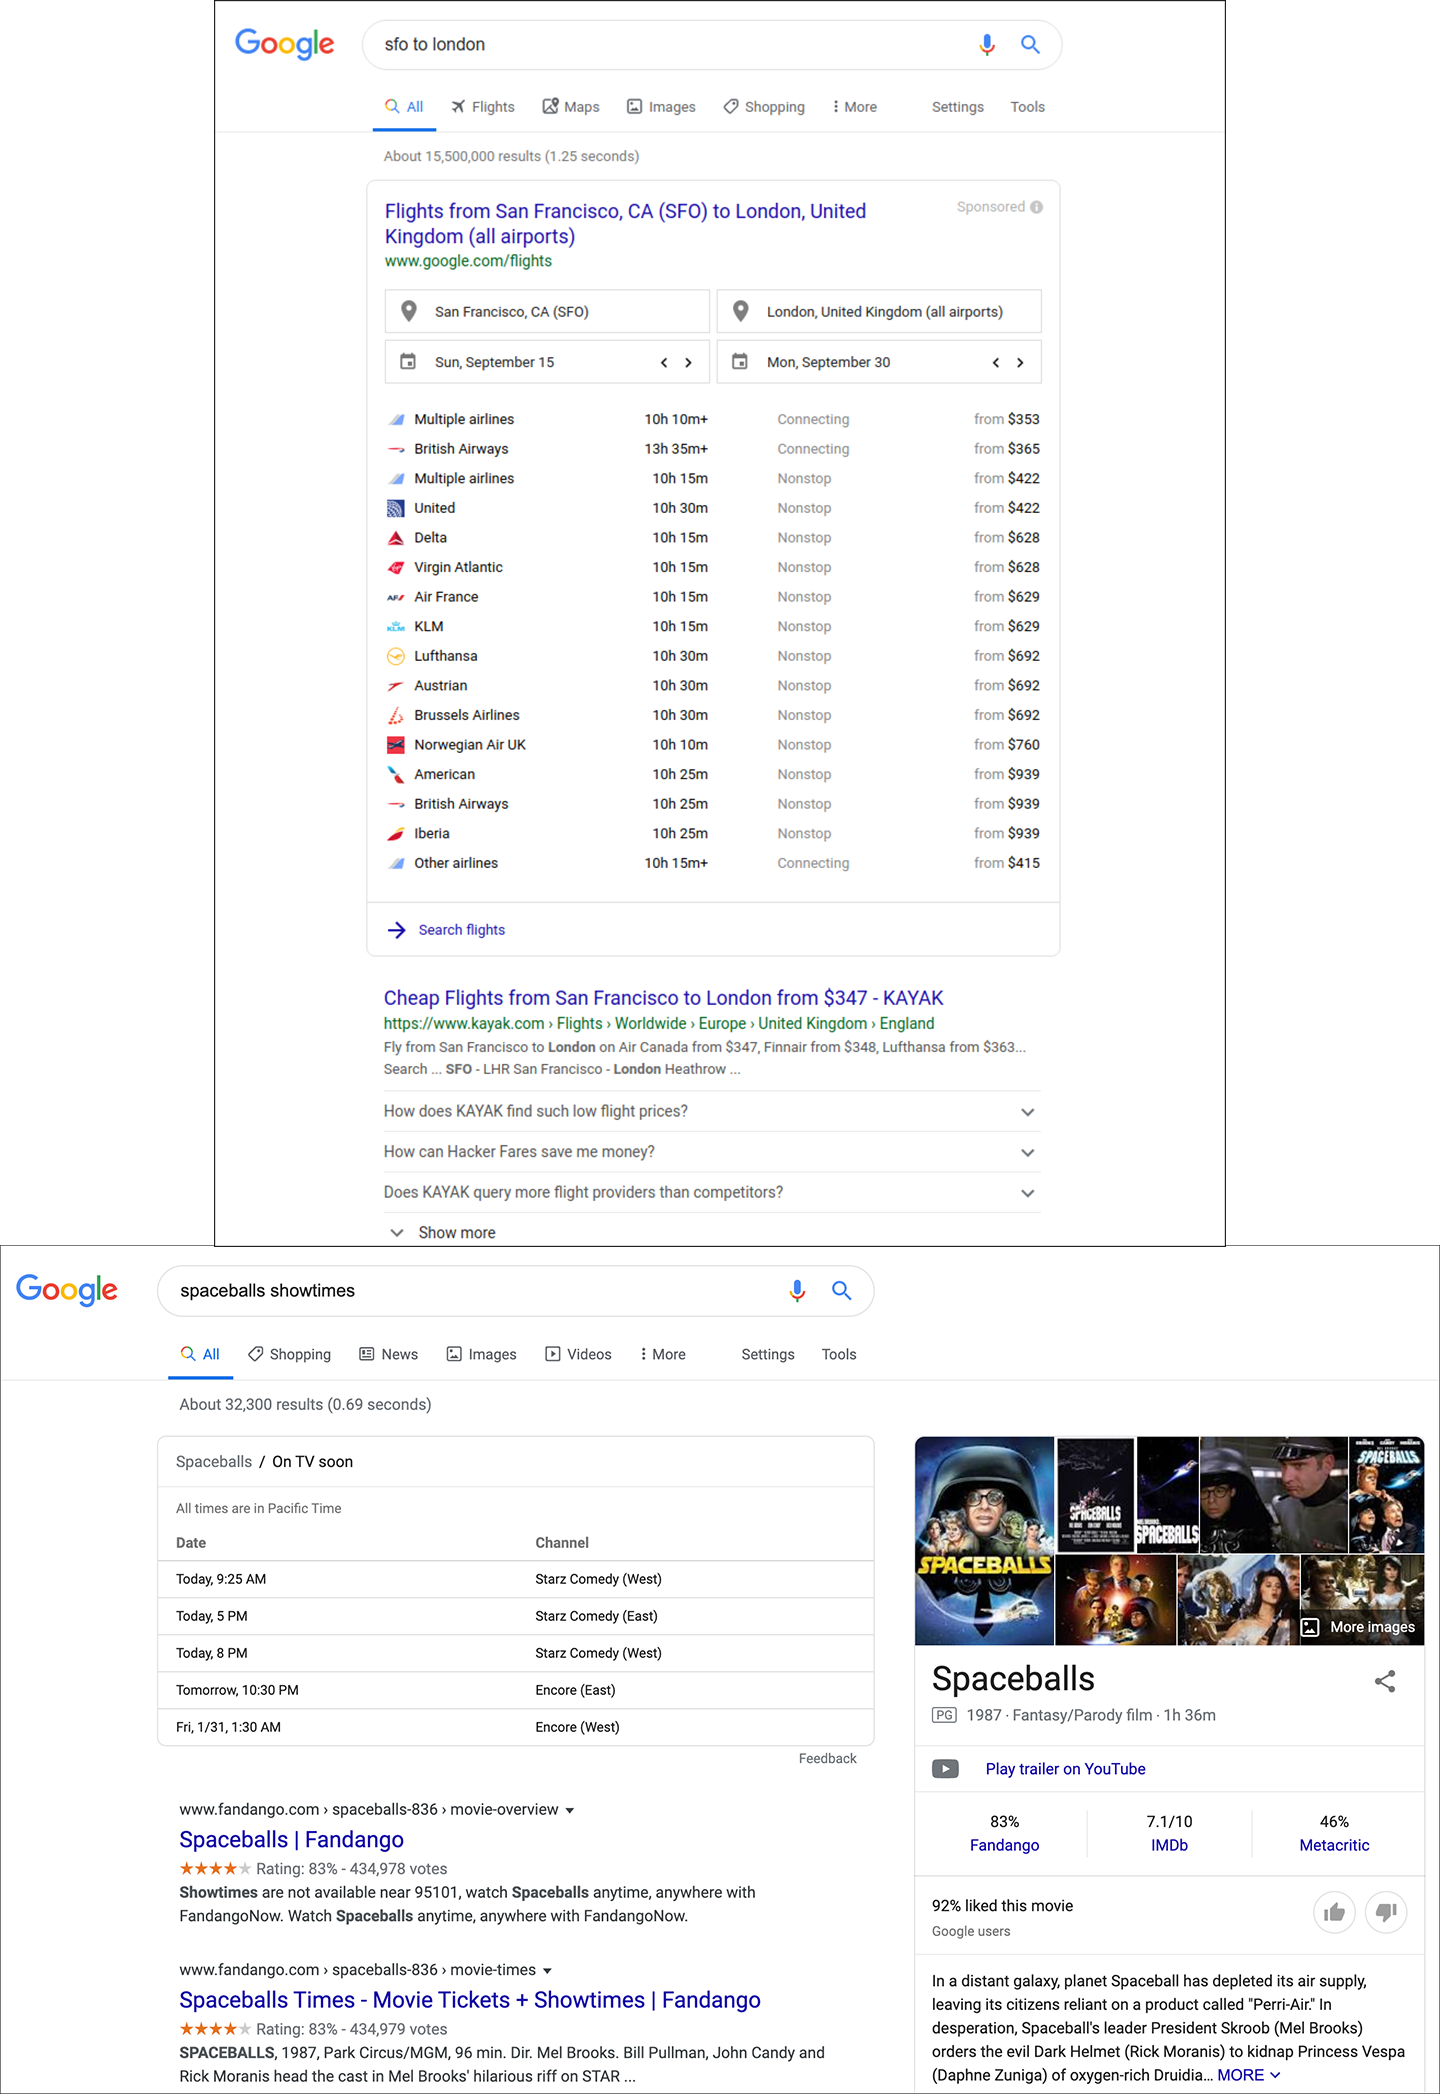 Screenshots of two complex Google search results